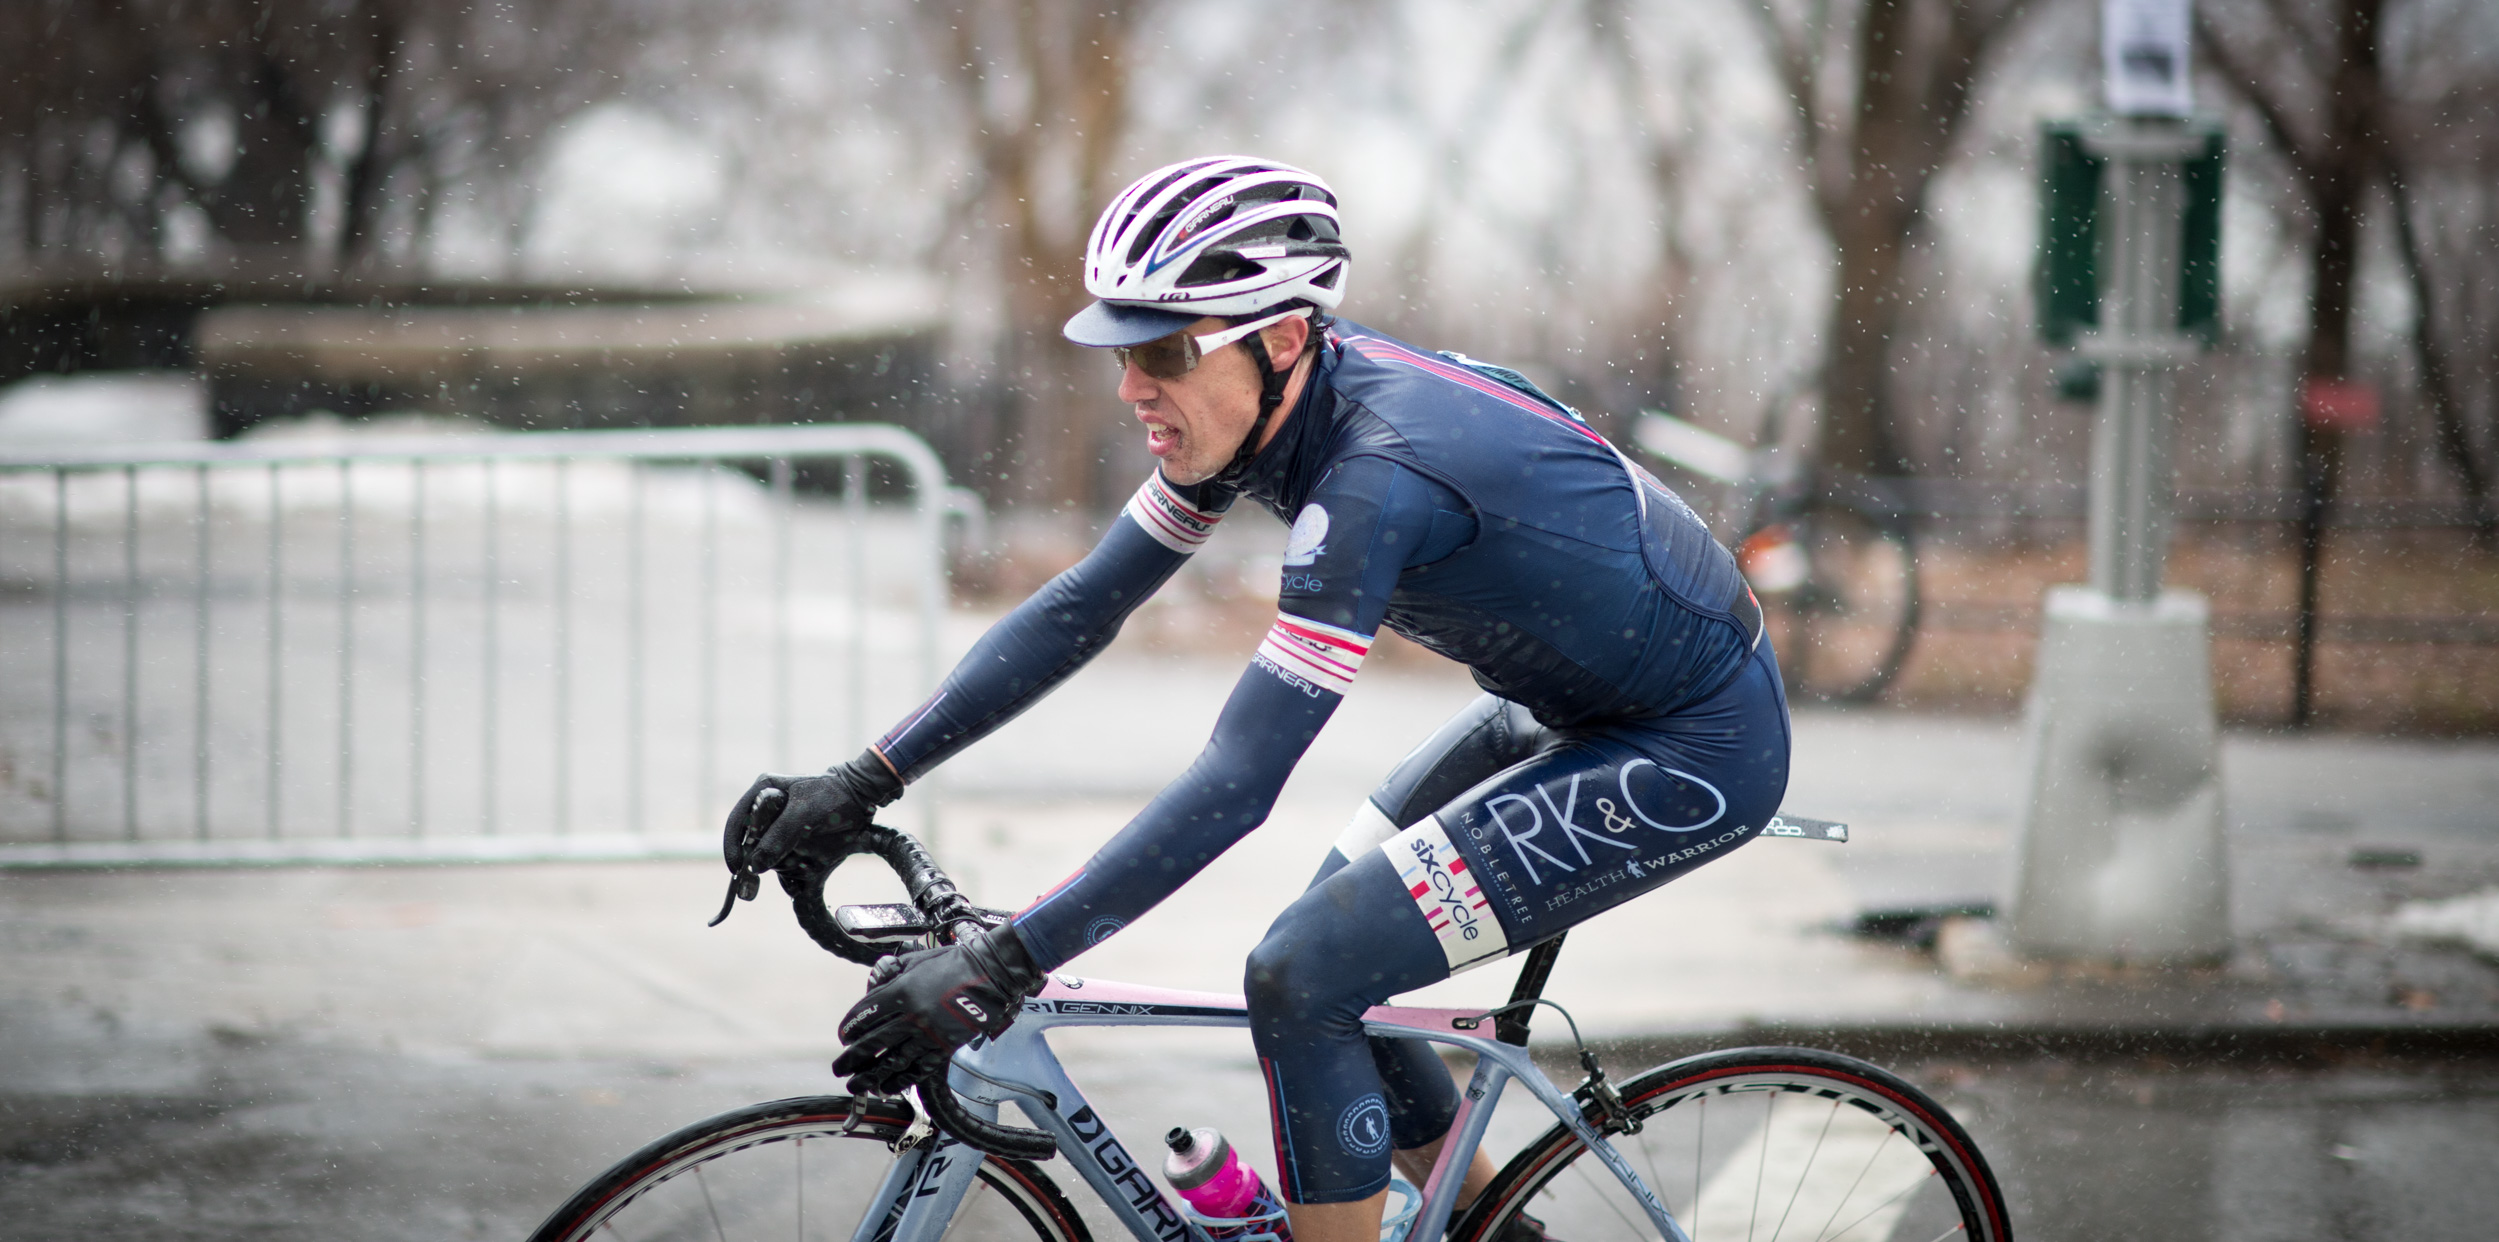  Louis Garneau Shows-Off Updated Groad Apparel and